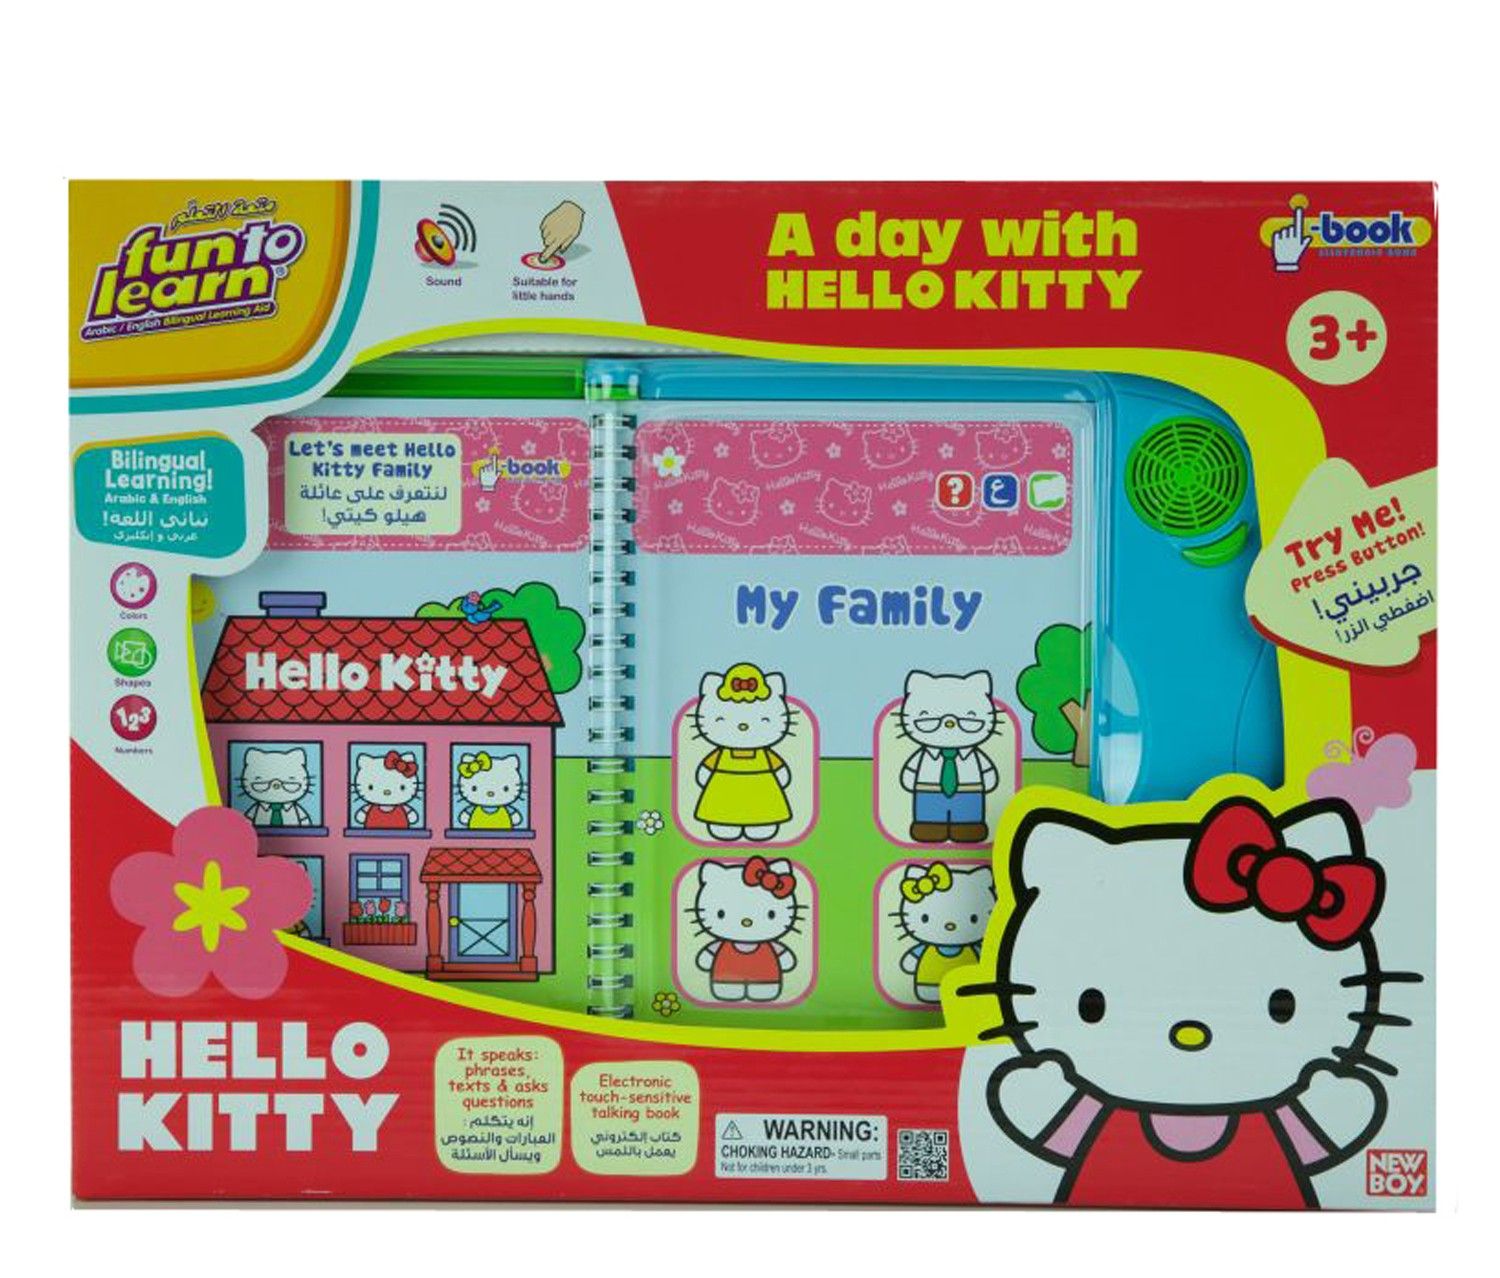 Fun To Learn A day with Hello Kitty Book